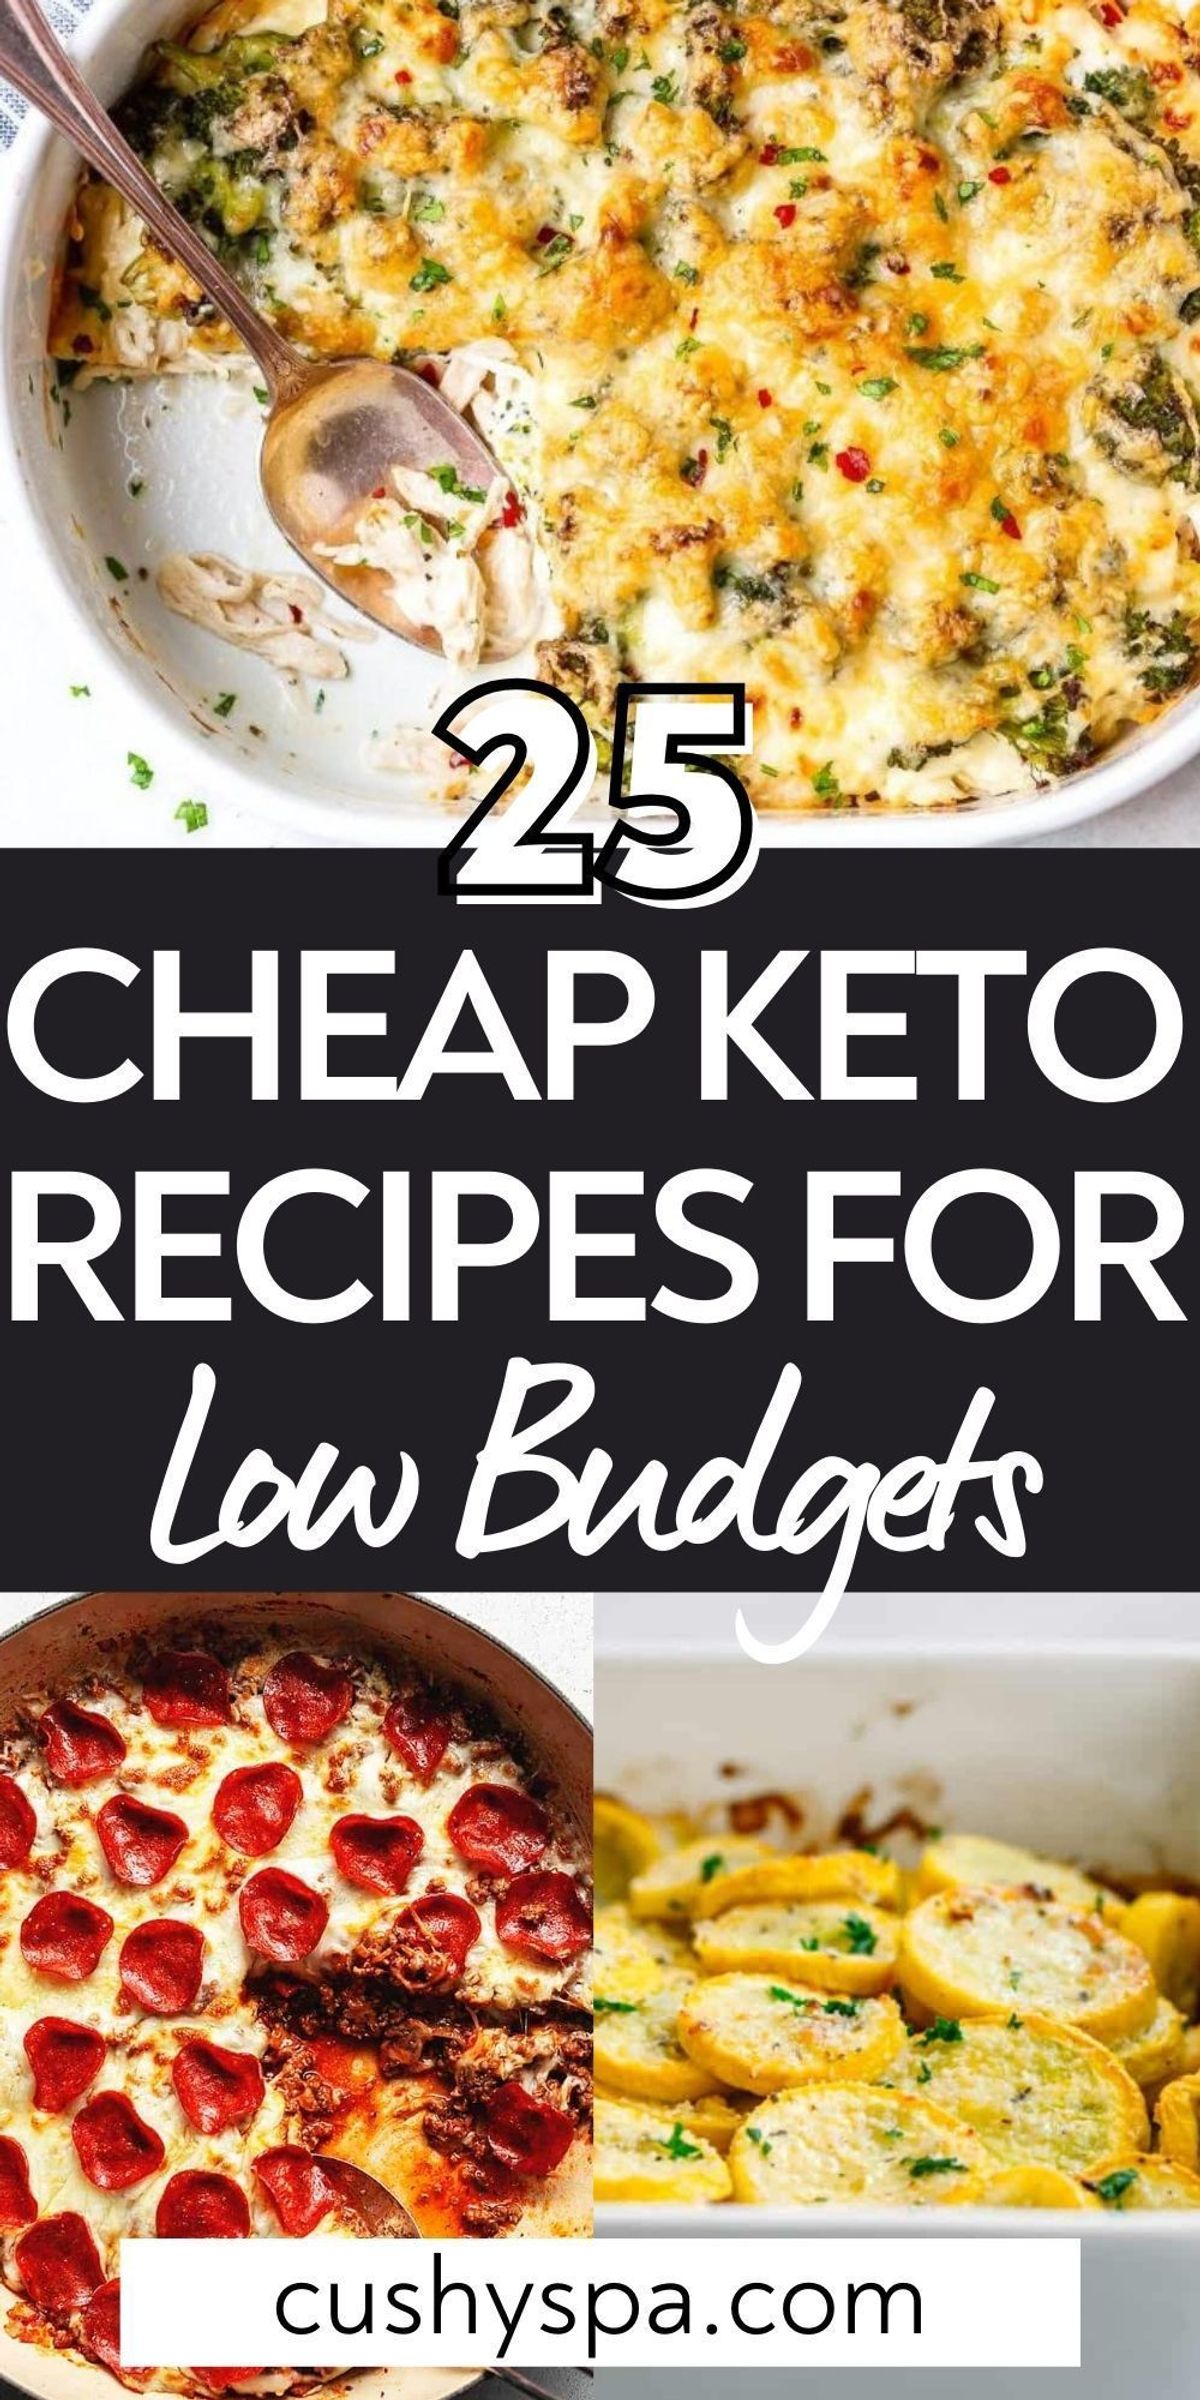 My favorite ideas for cheap keto meals